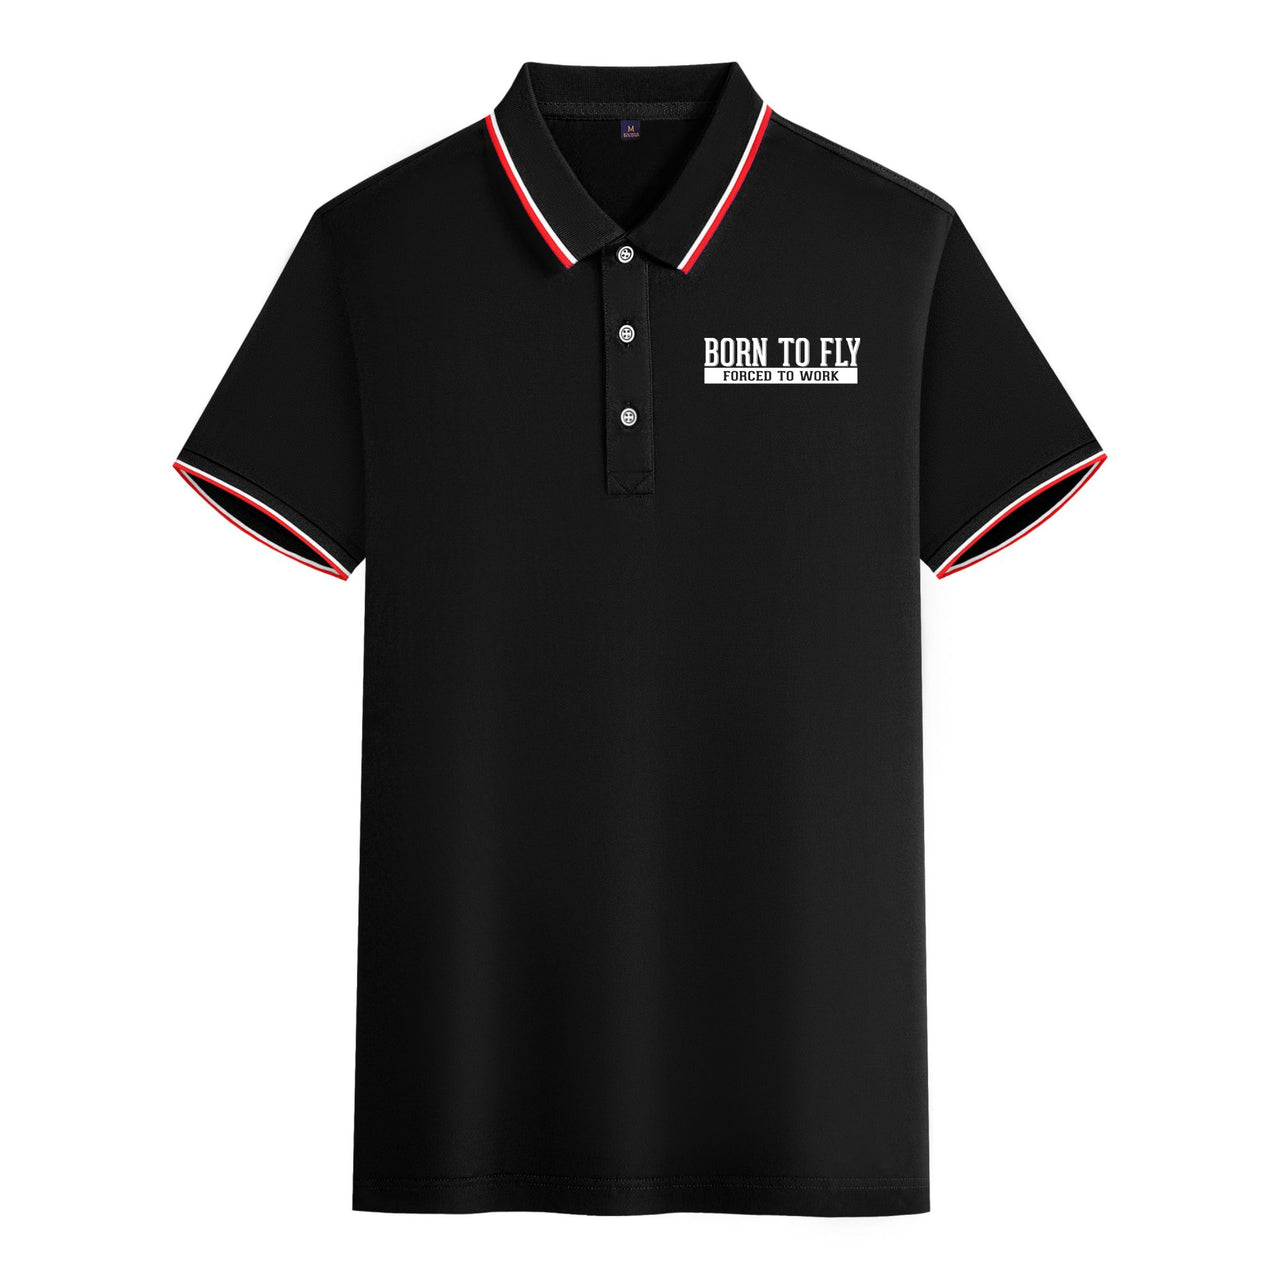 Born To Fly Forced To Work Designed Stylish Polo T-Shirts